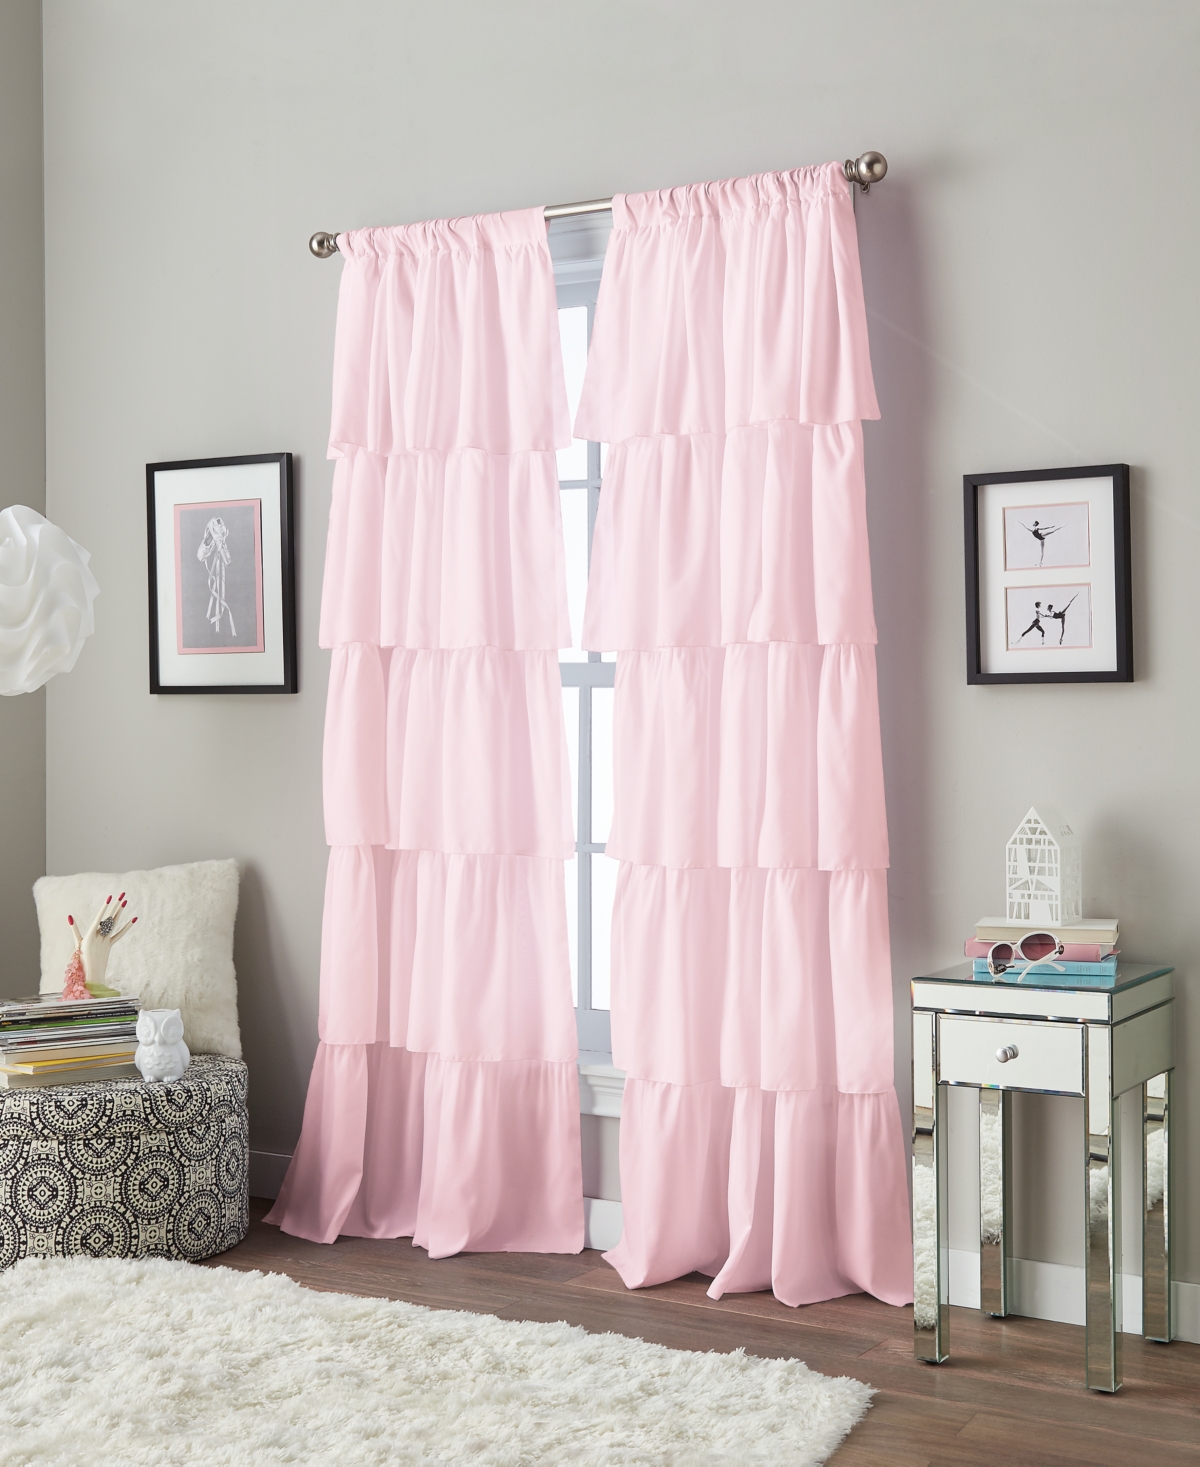 Curtainworks Flounced Poletop Single Curtain Panel, 42" X 63" In Pink